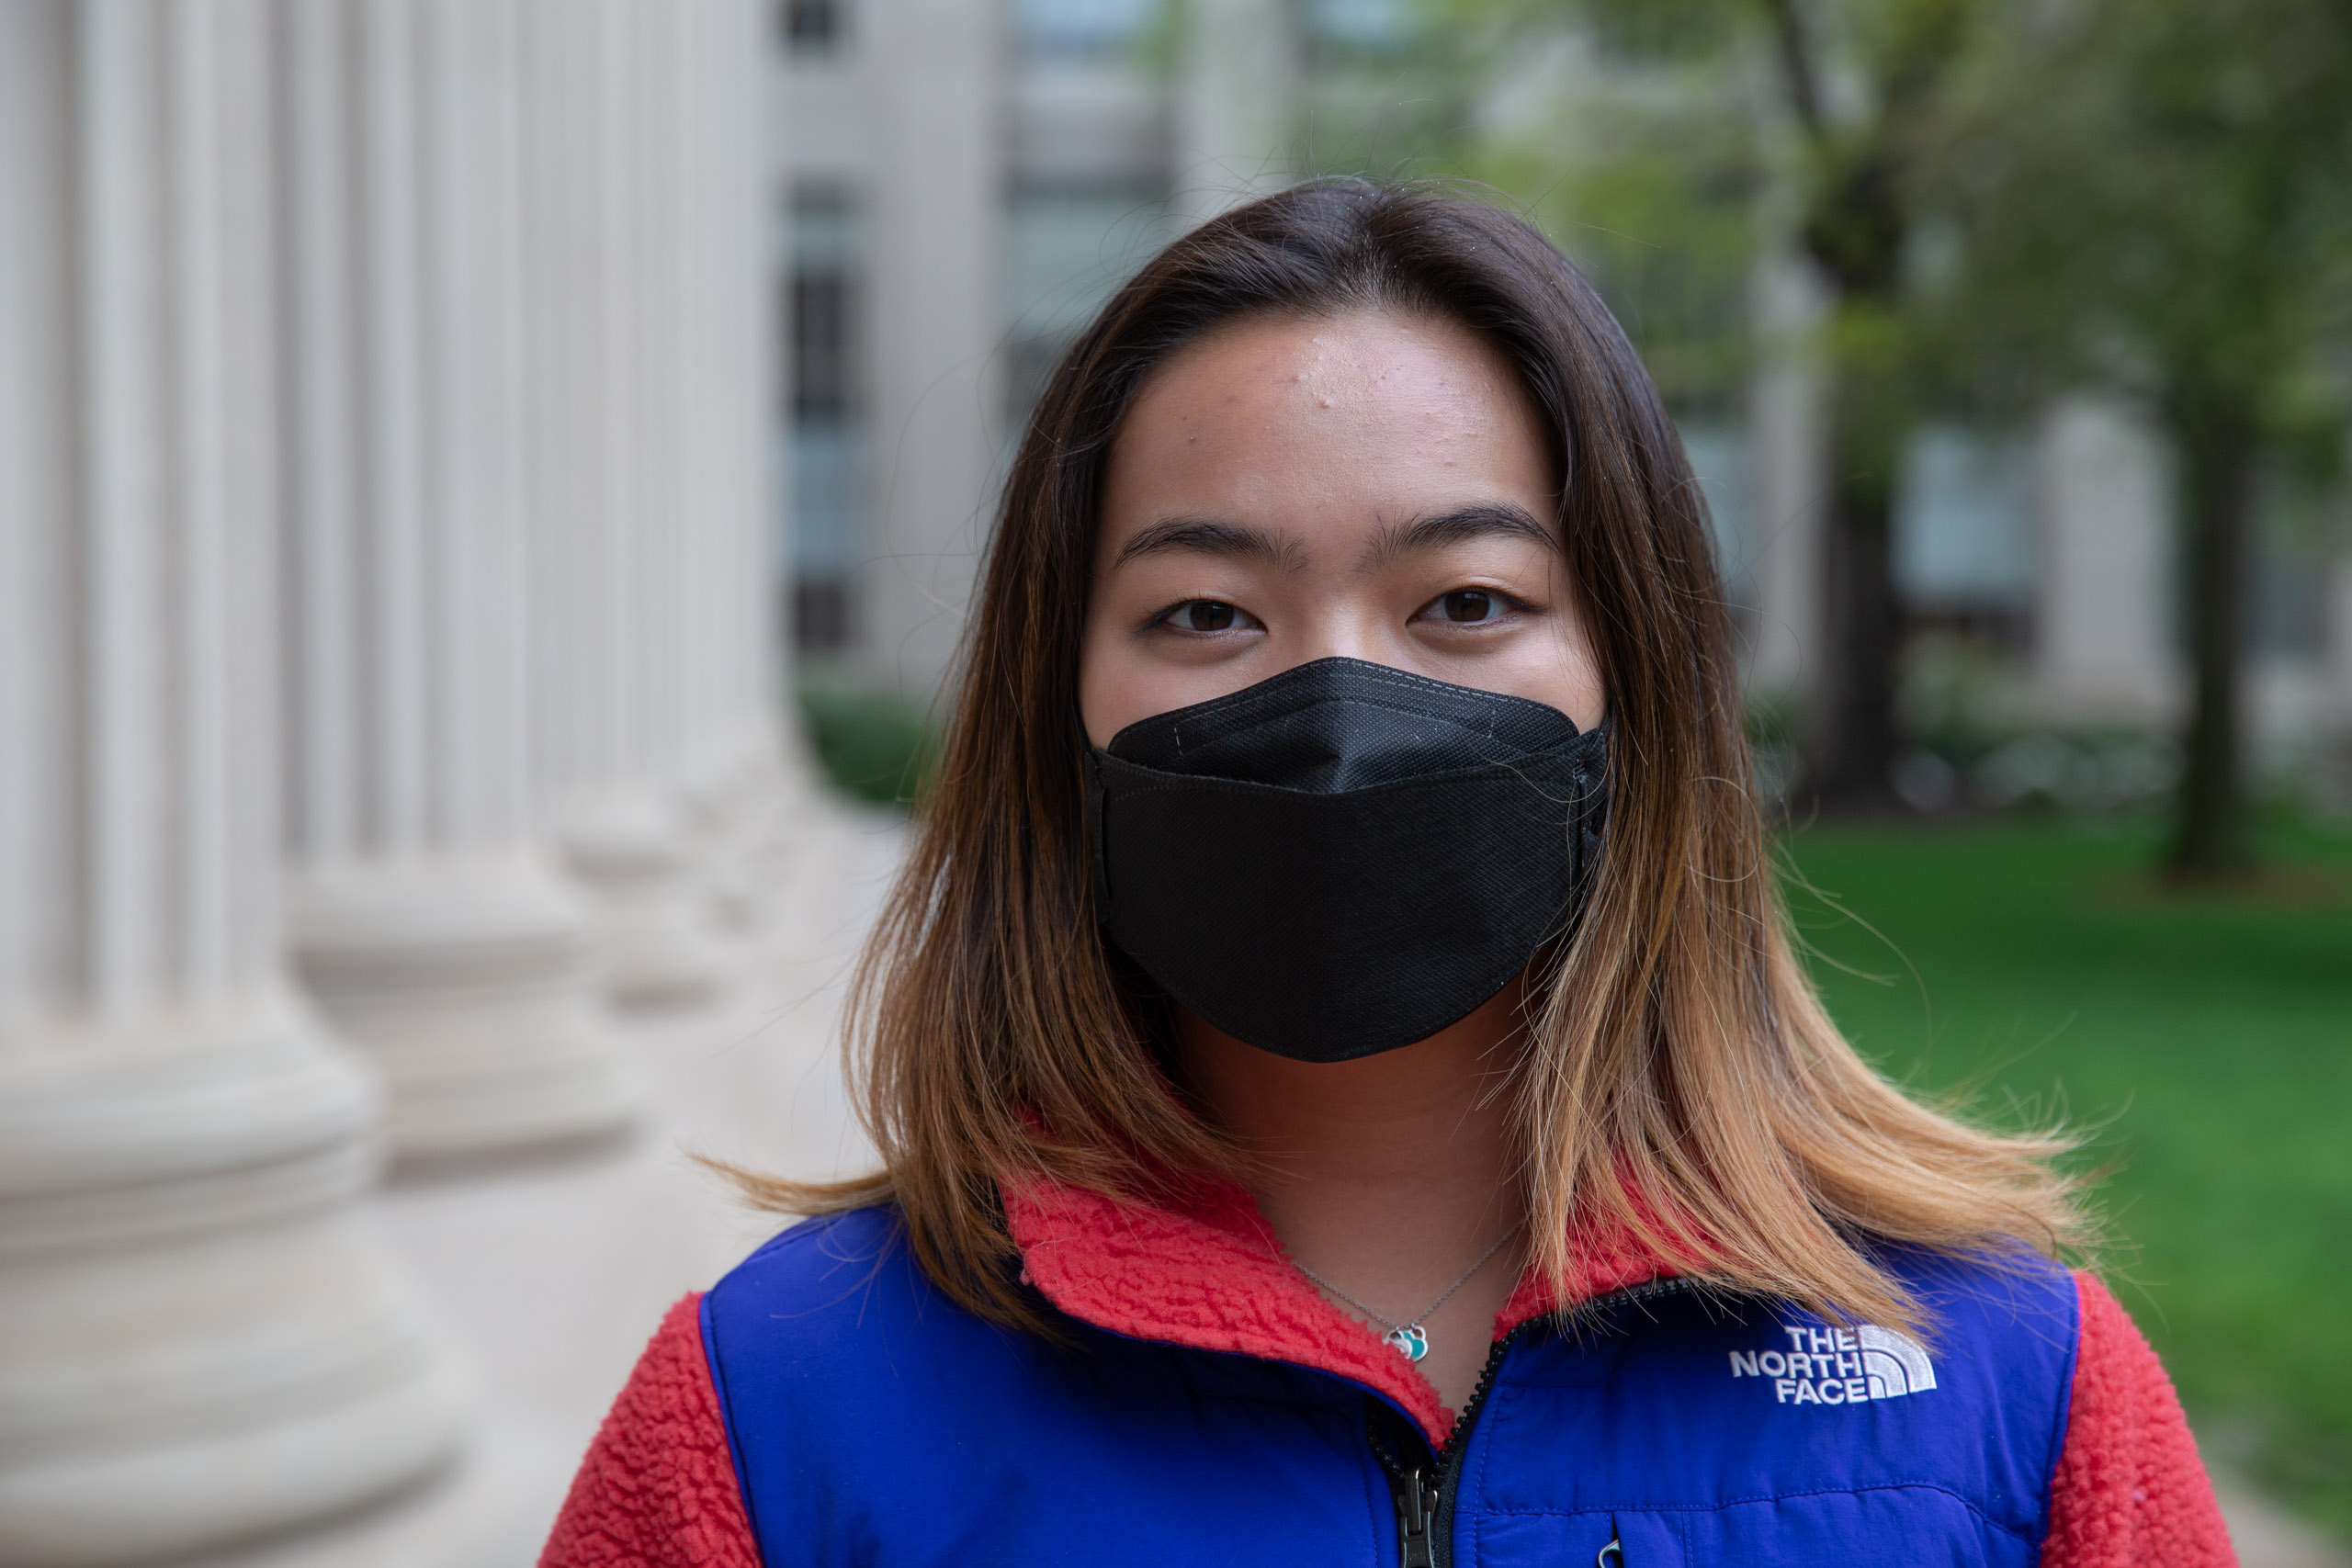 MIT student in Toy design class 2.00b Spring 2021 remove their masks. Series by Photographer Danny Goldfield.